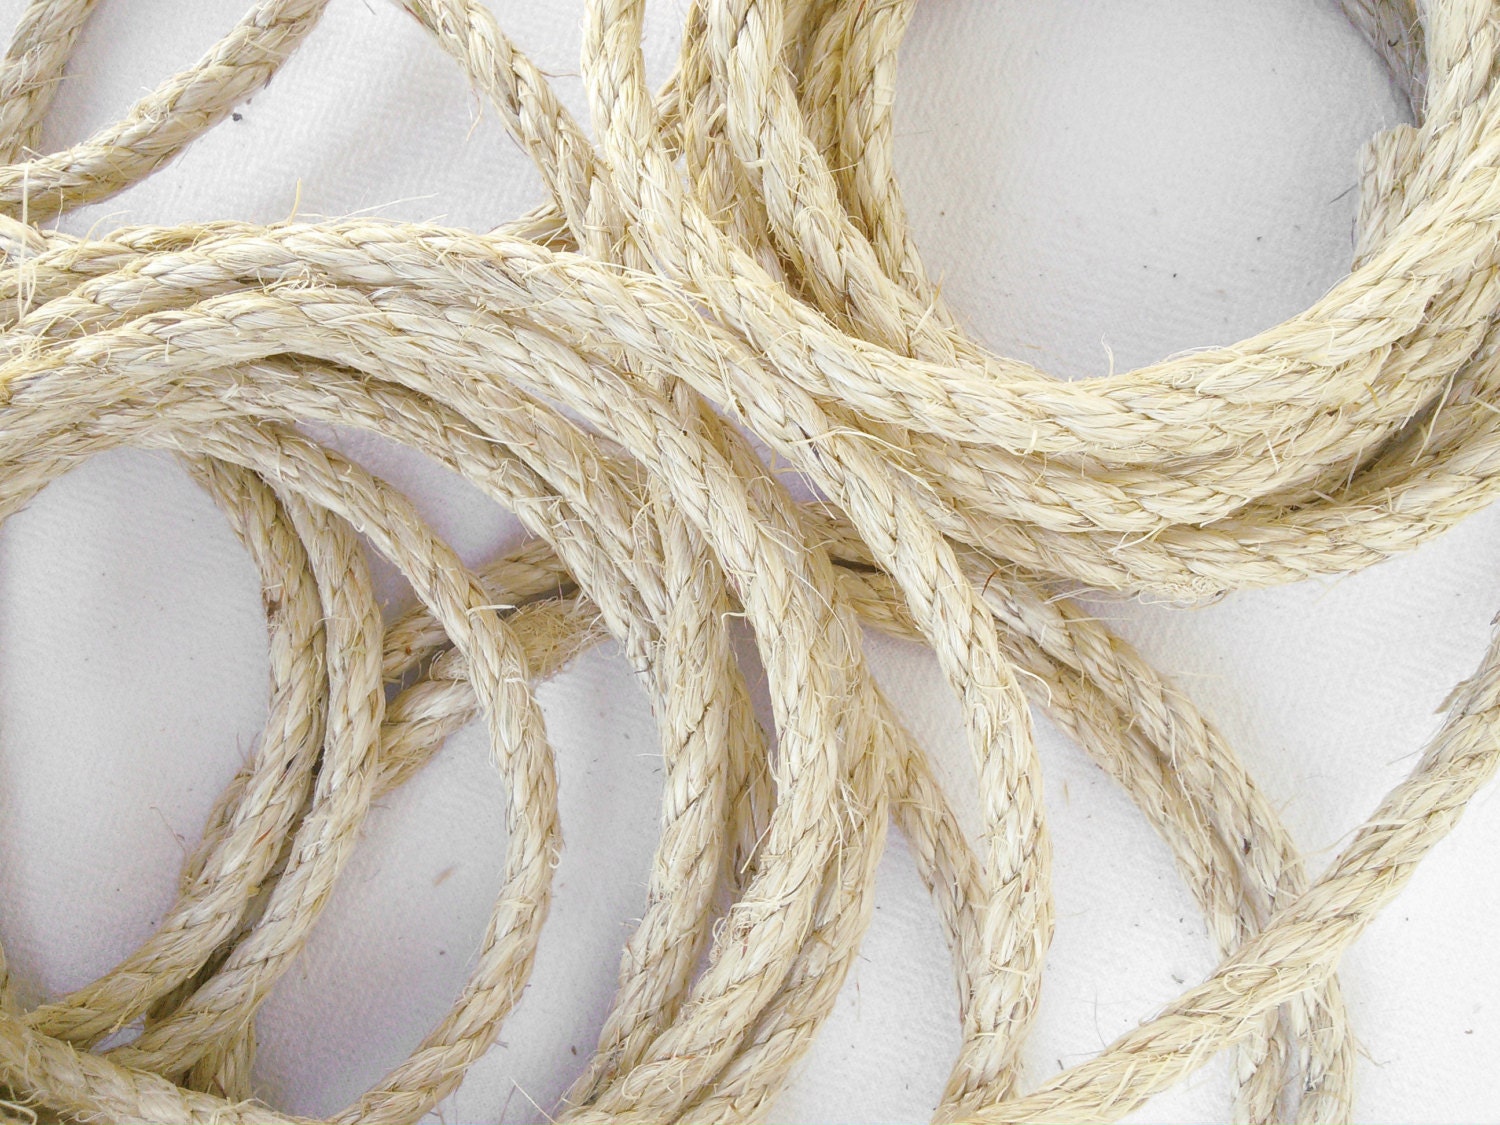 Twisted Cotton Rope - 1/4 Inch Rope in 10, 25, 50, and 100 Feet